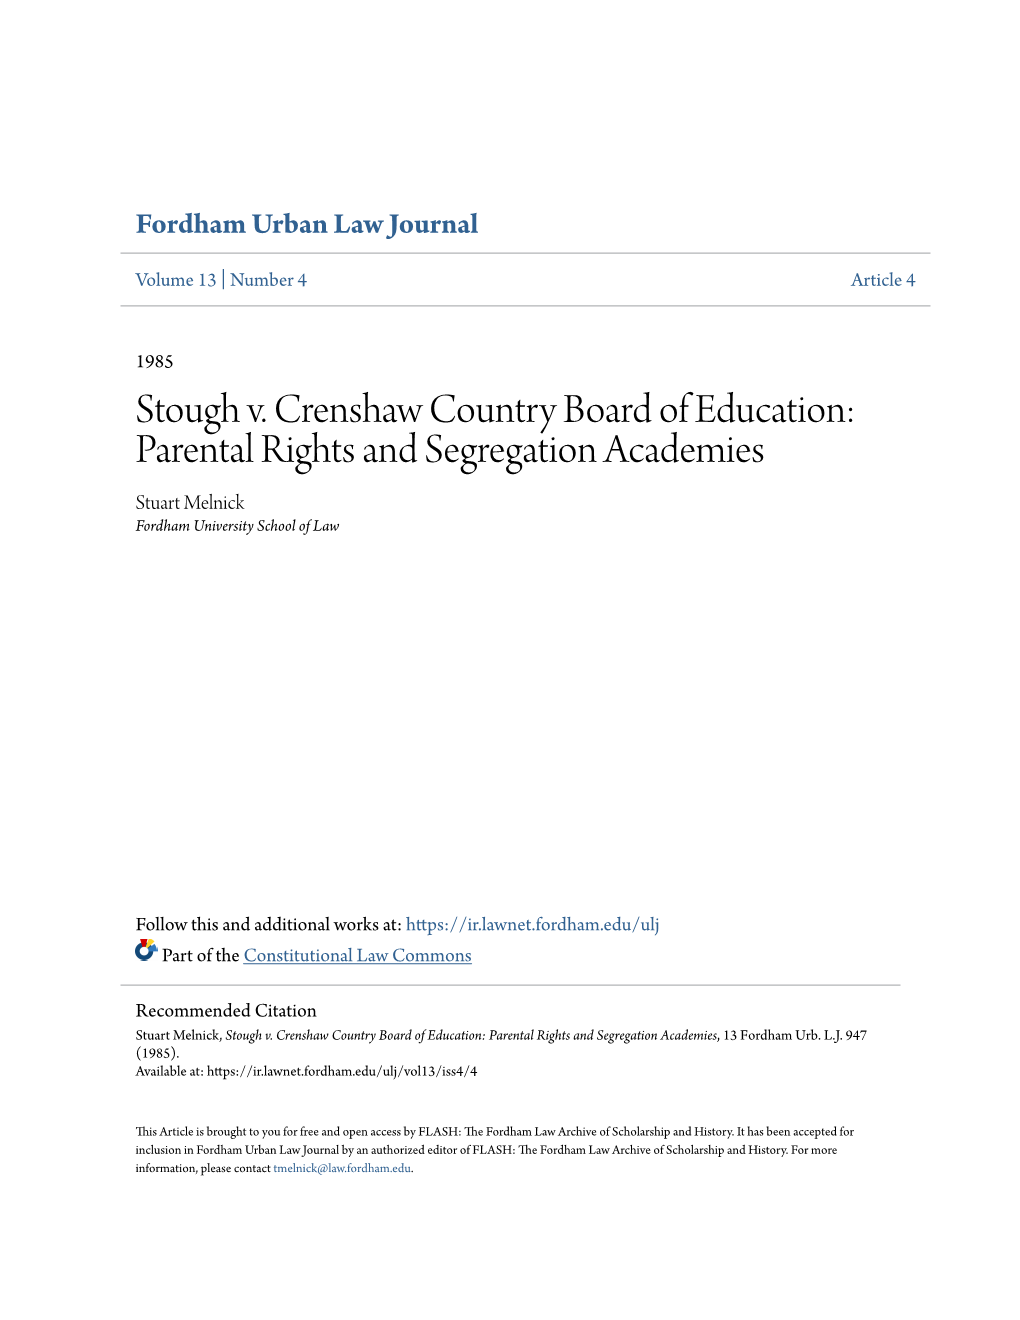 Stough V. Crenshaw Country Board of Education: Parental Rights and Segregation Academies Stuart Melnick Fordham University School of Law